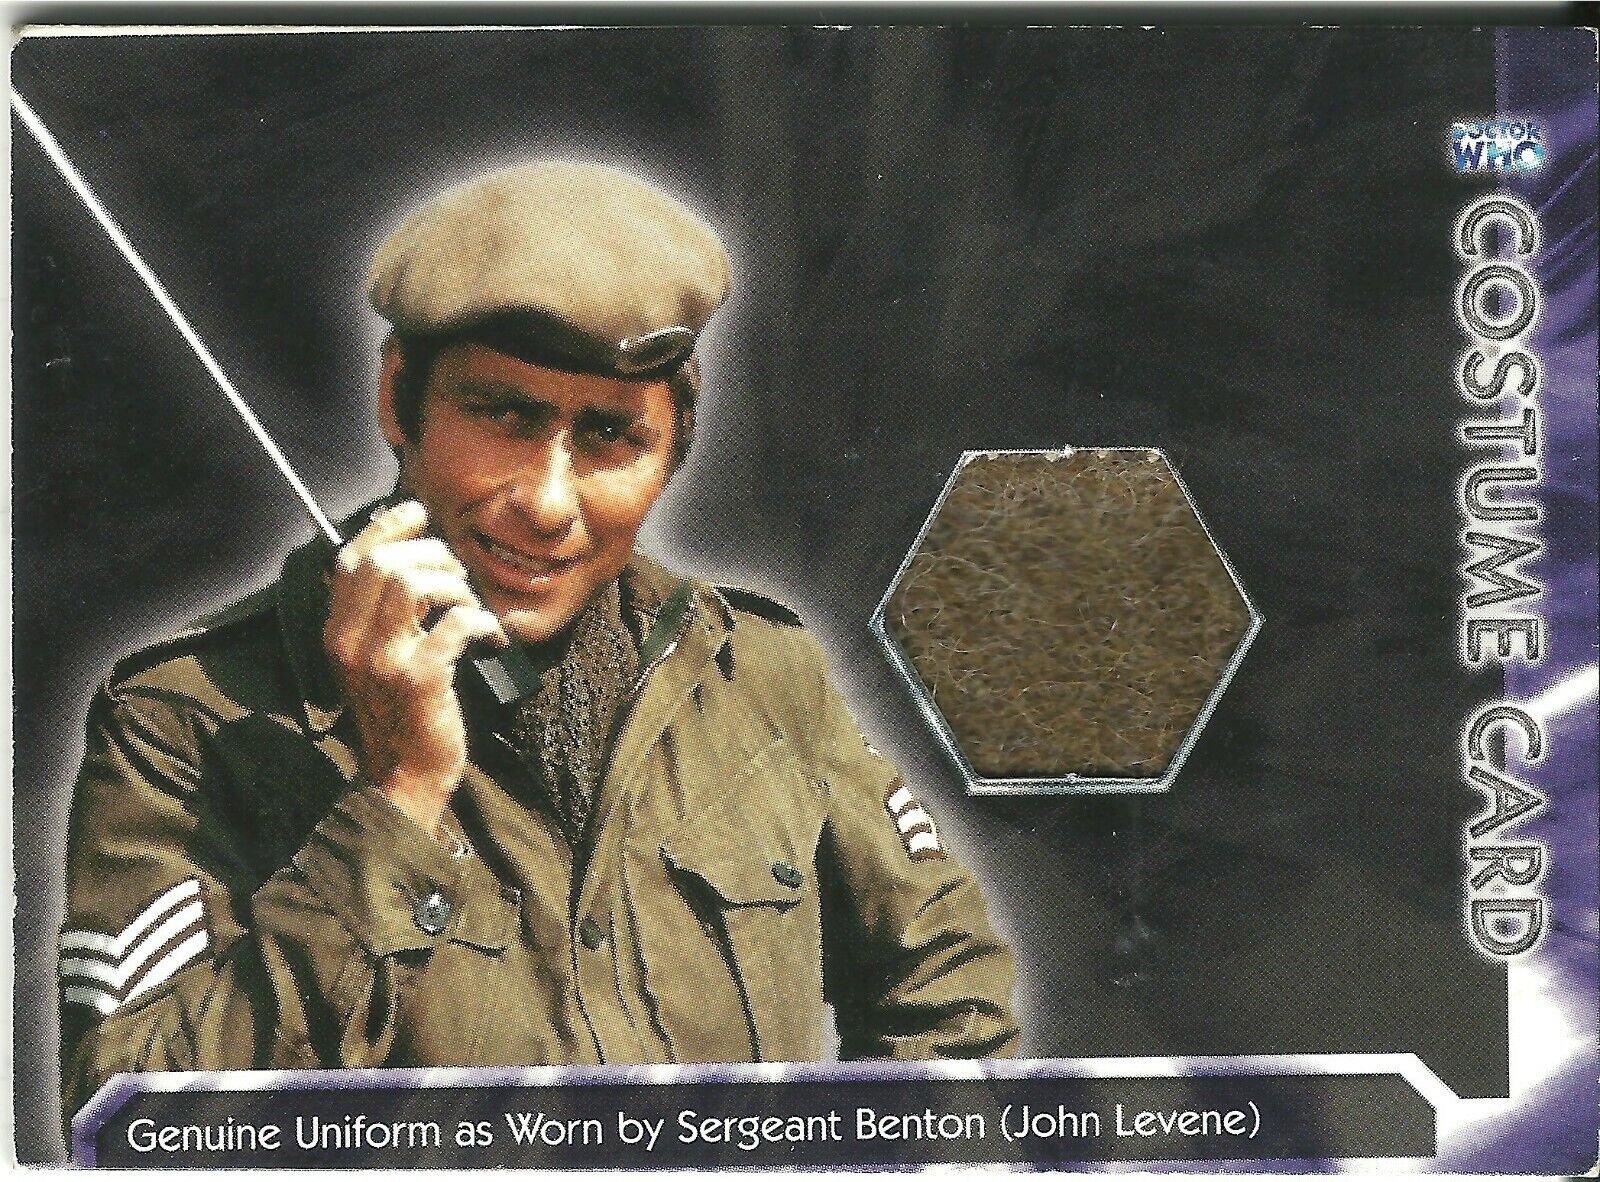 Doctor Who Strictly Ink Costume Card WHOT-C1 Genuine Uniform worn by John Levene